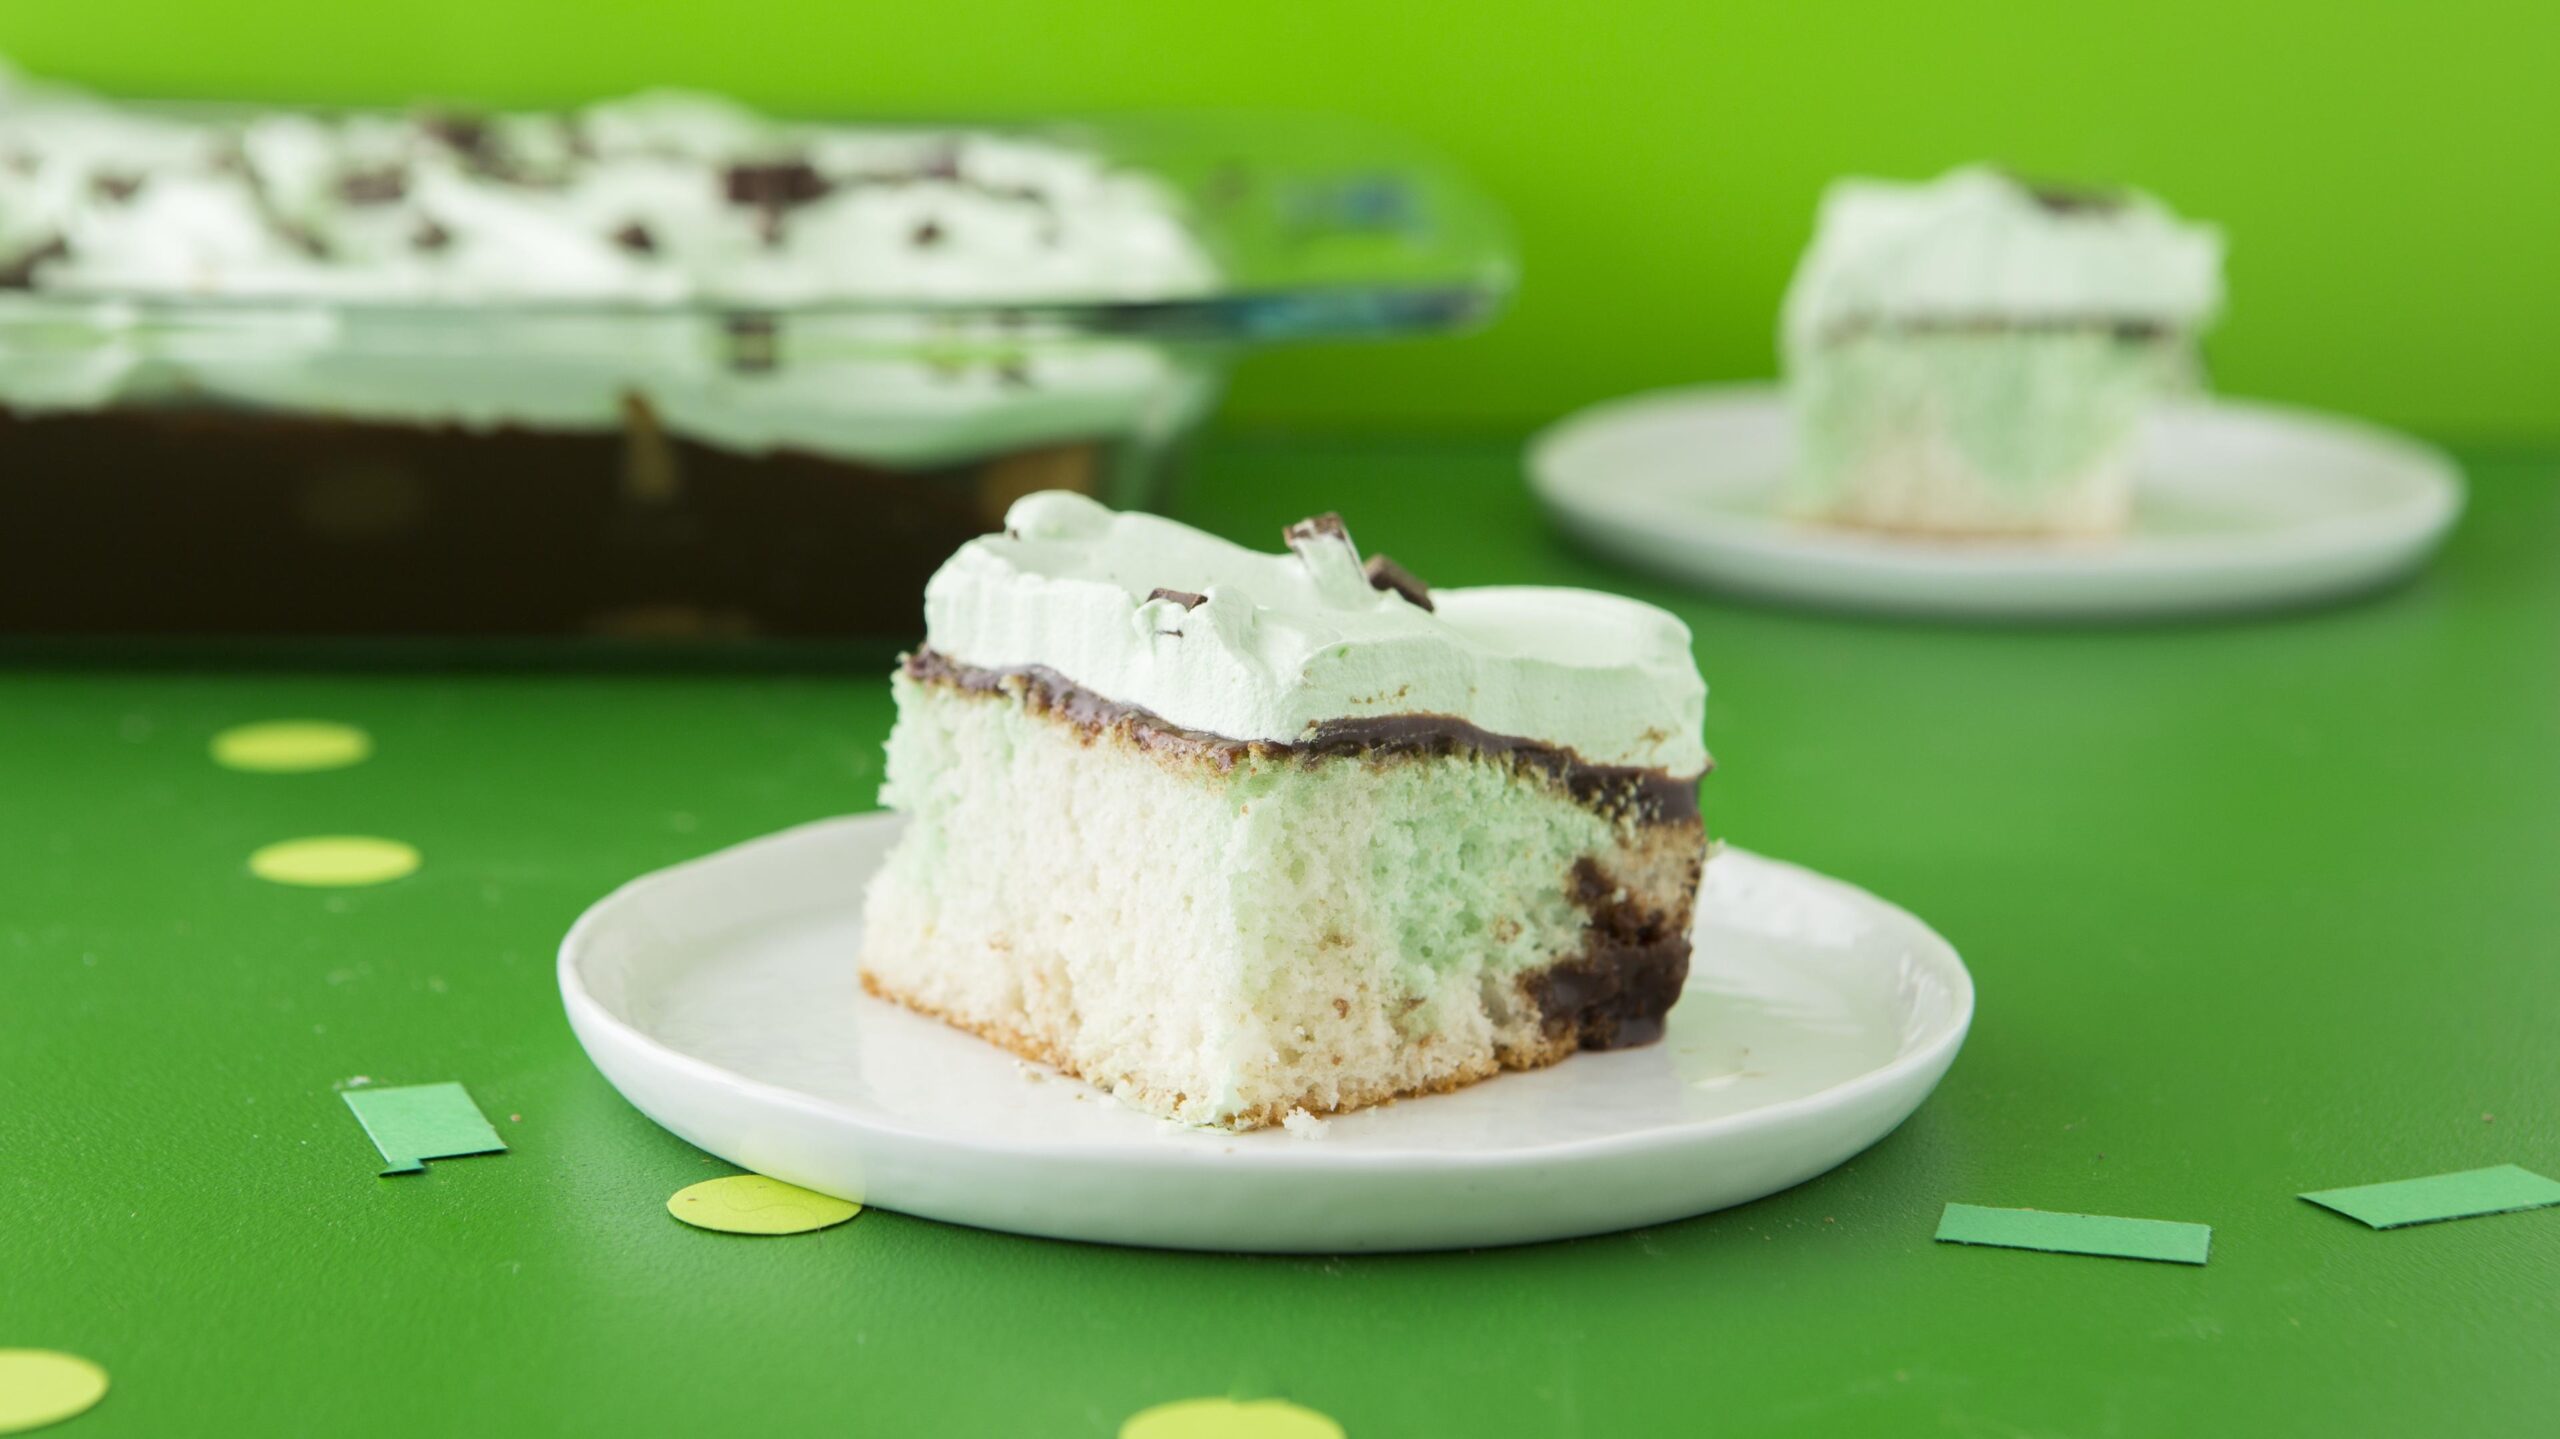  Satisfy your sweet tooth with this green and nutty Pistachio Poke Cake!